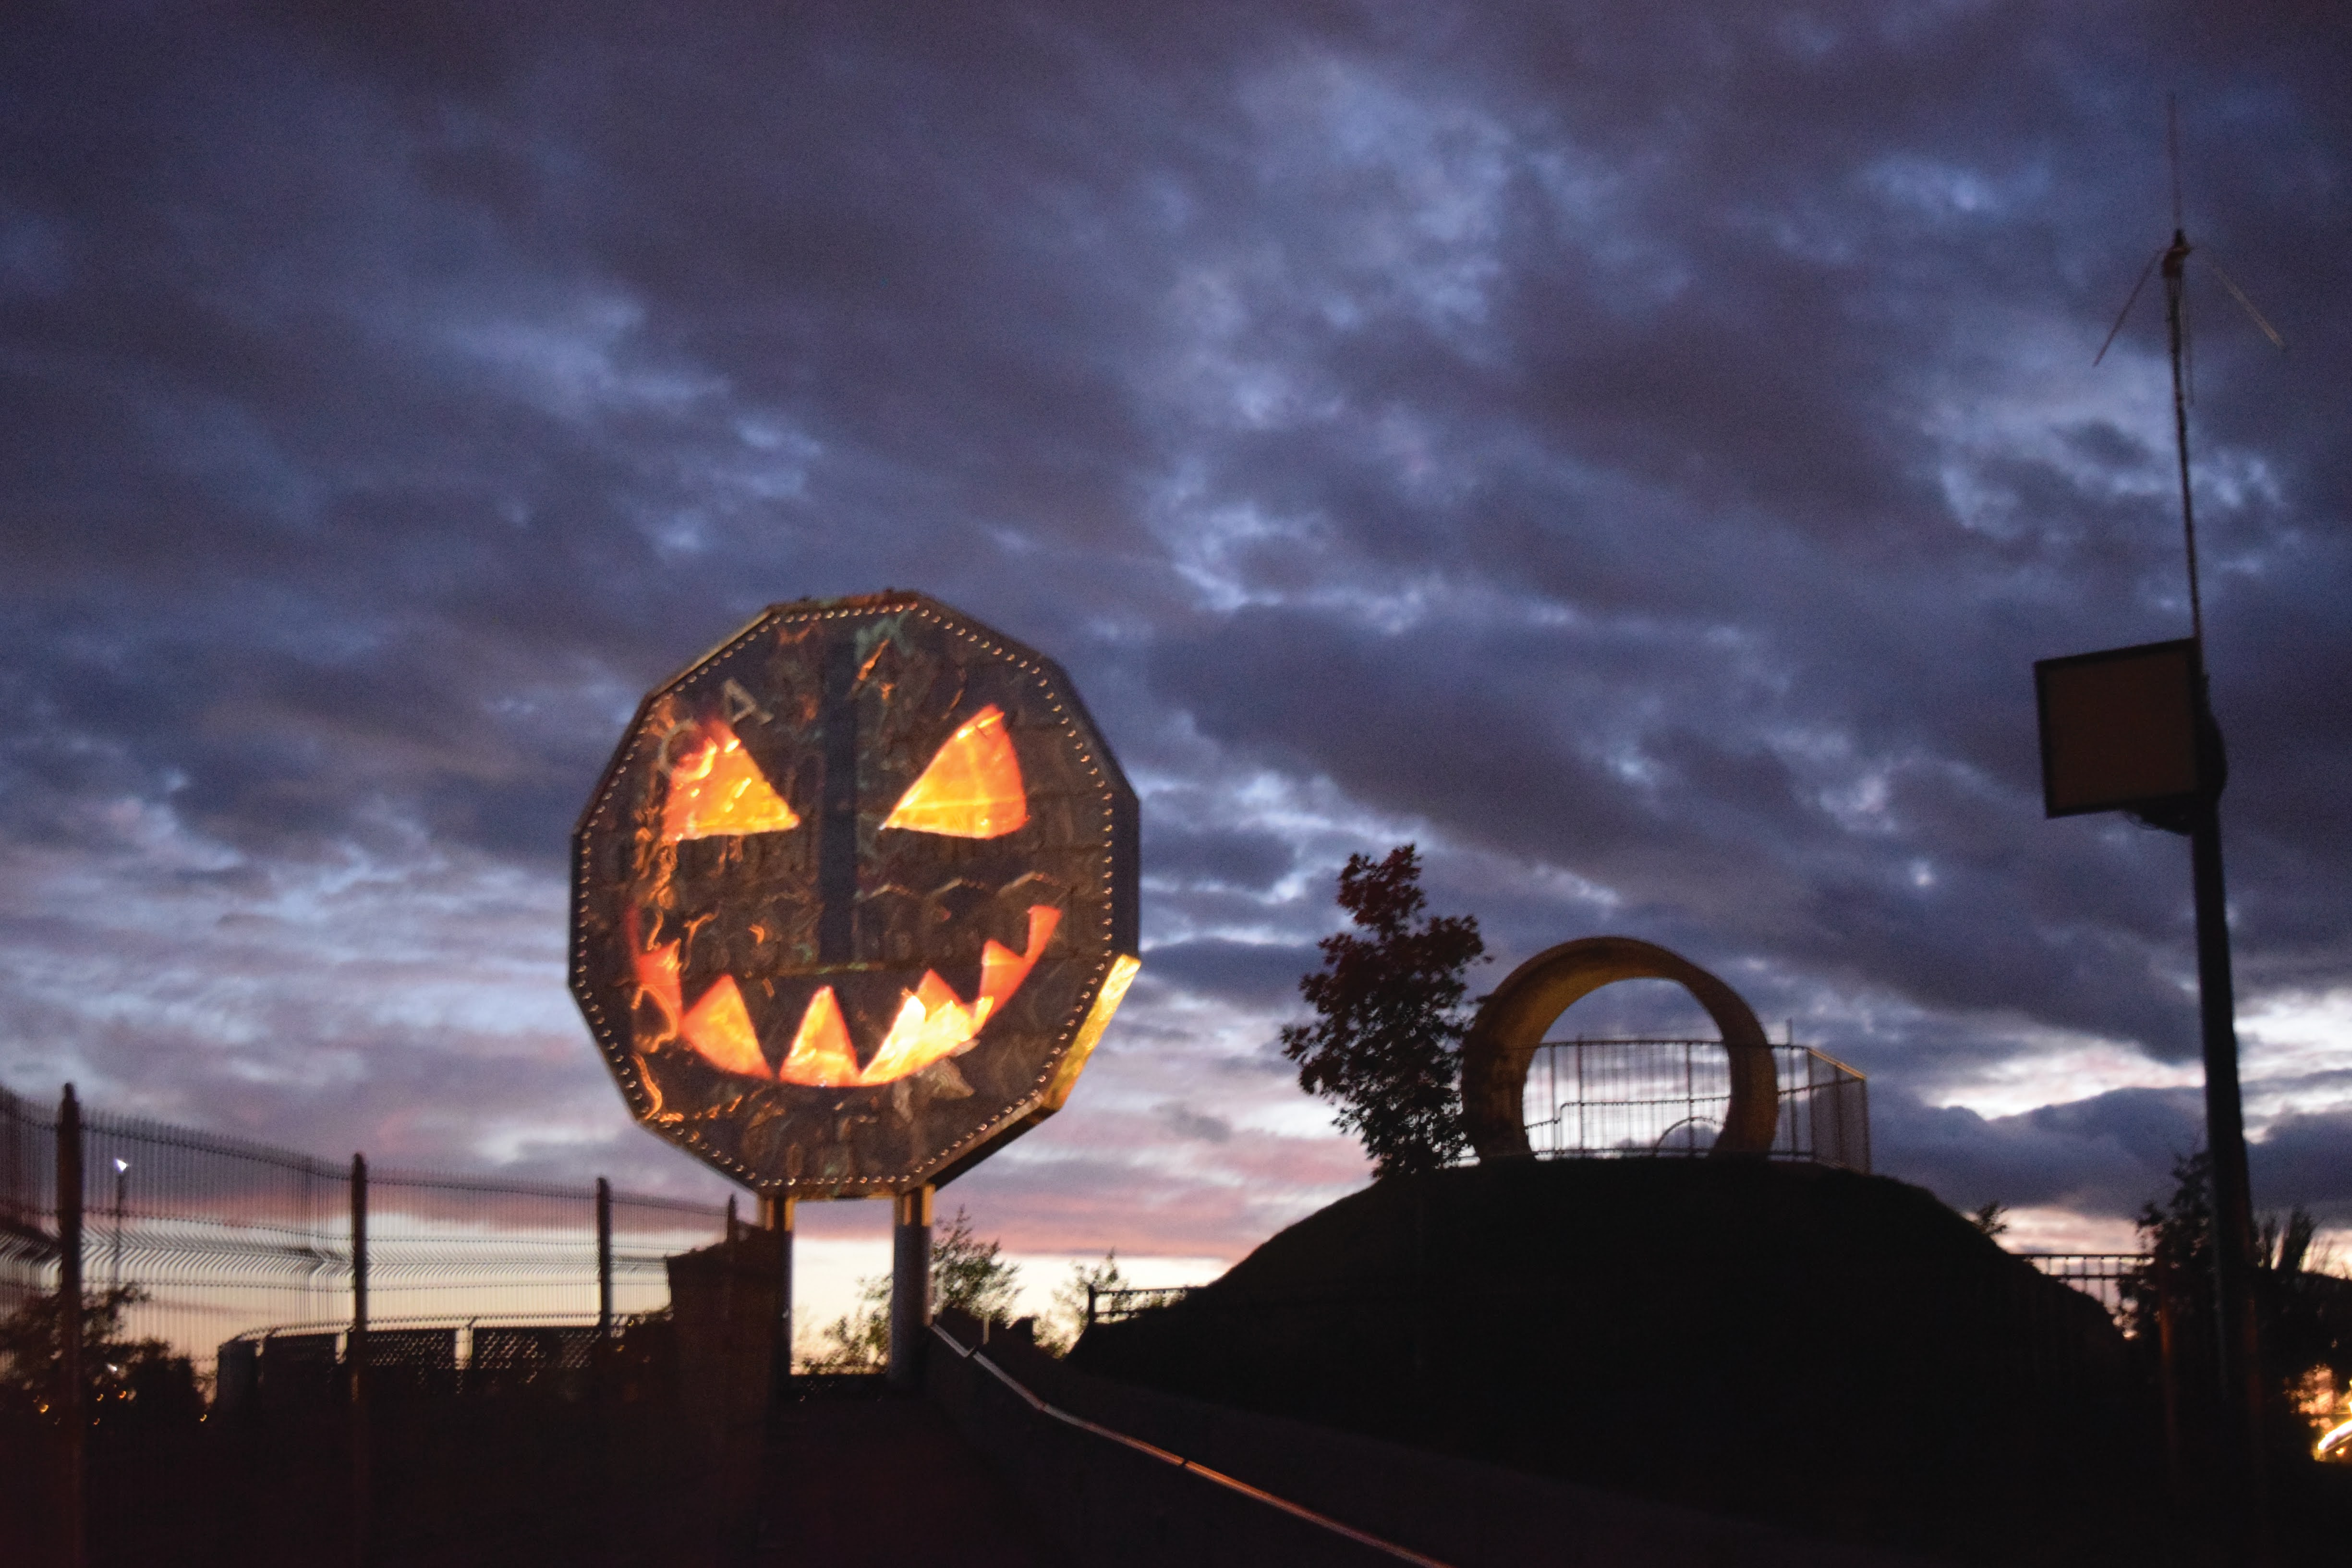 The Sudbury Big Nickel Monument in front of a dusky, clouded sky, with the face of a Jack-o-lantern projected onto the nickel in orange light.